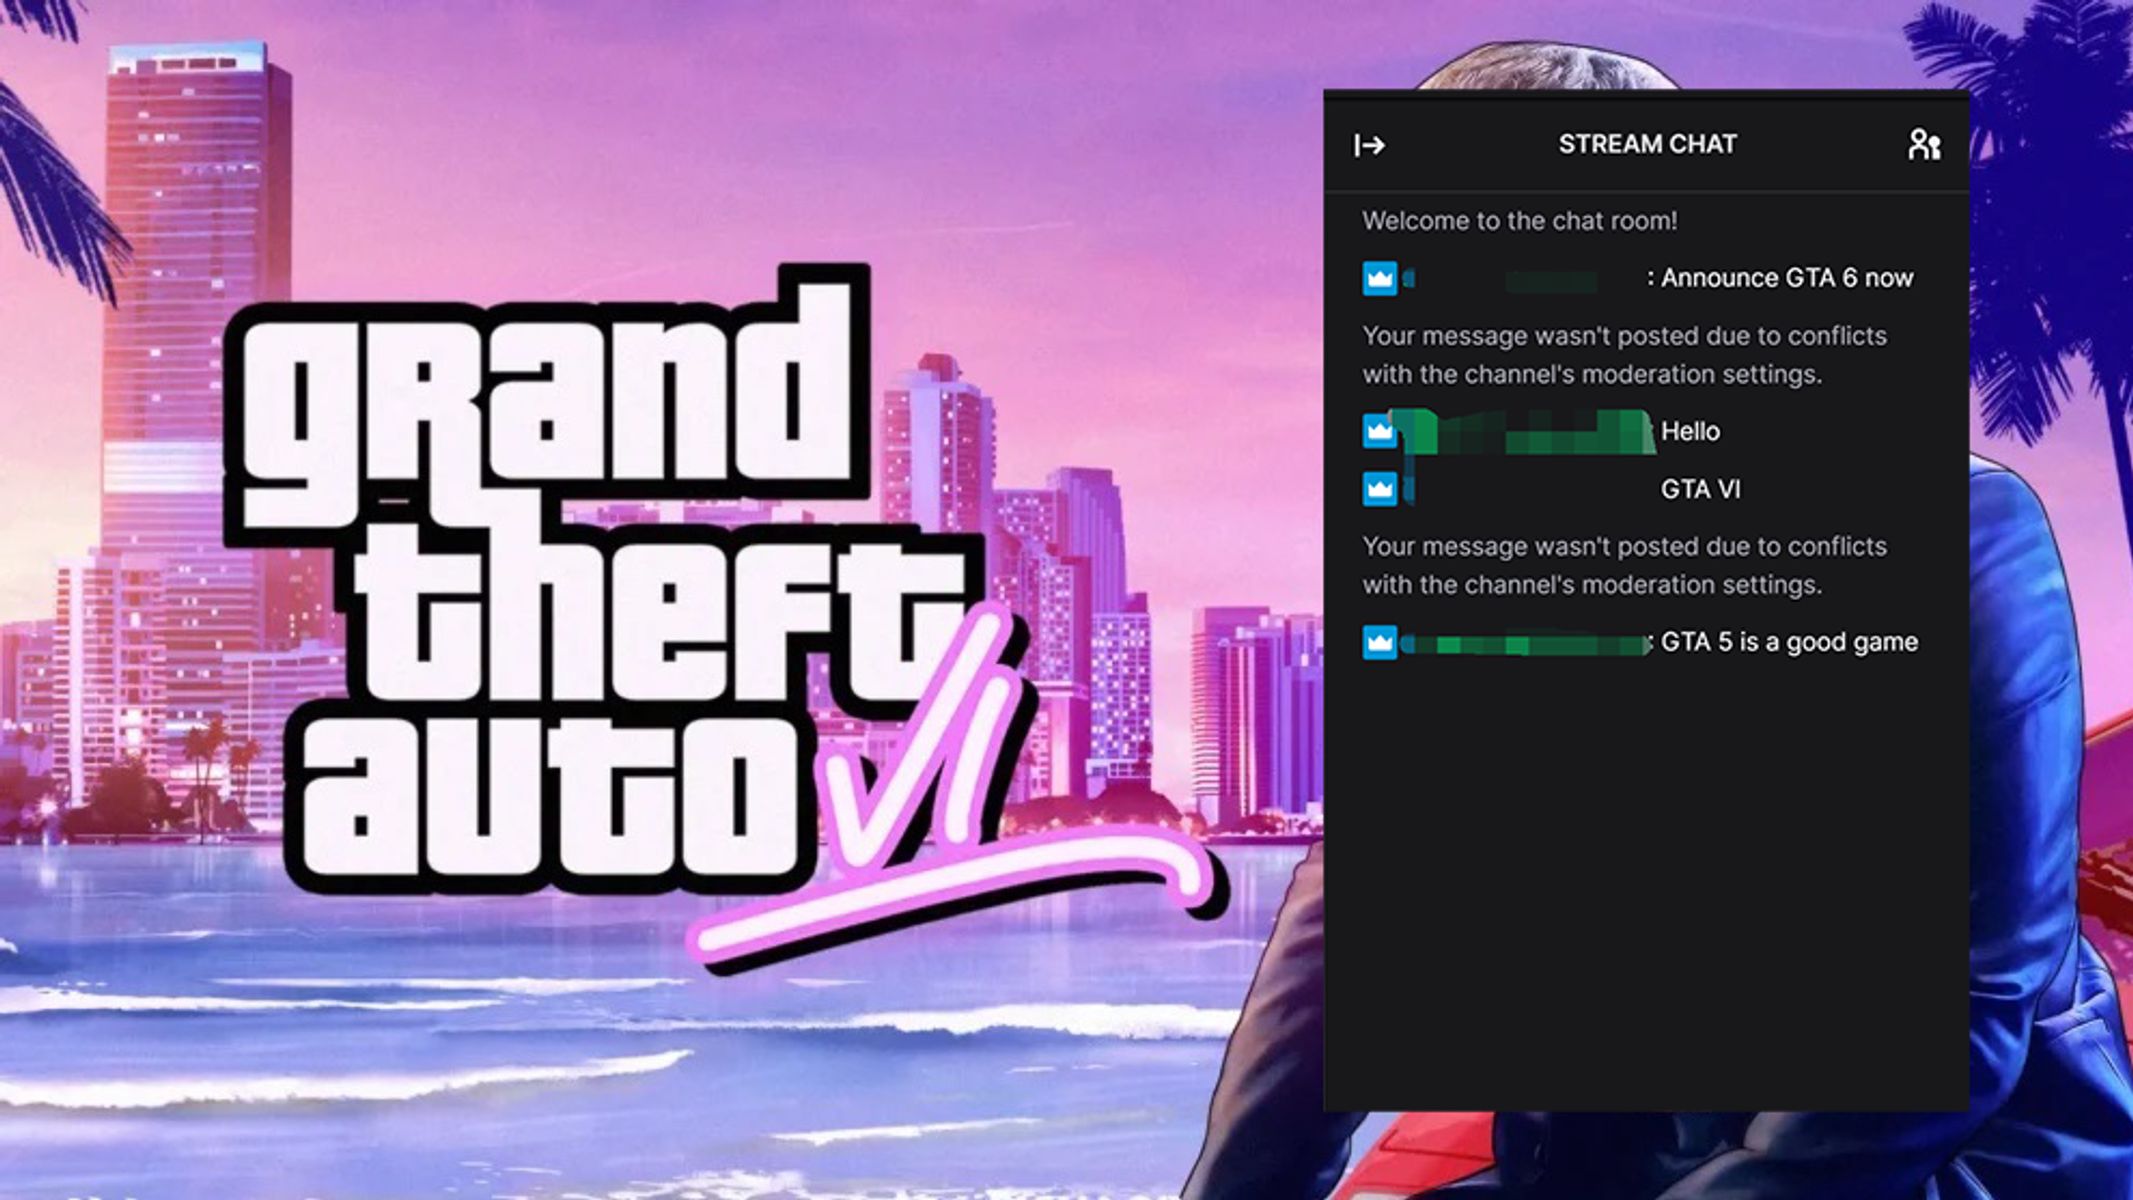 GTA 6 The famous Twitch Streamer says the game